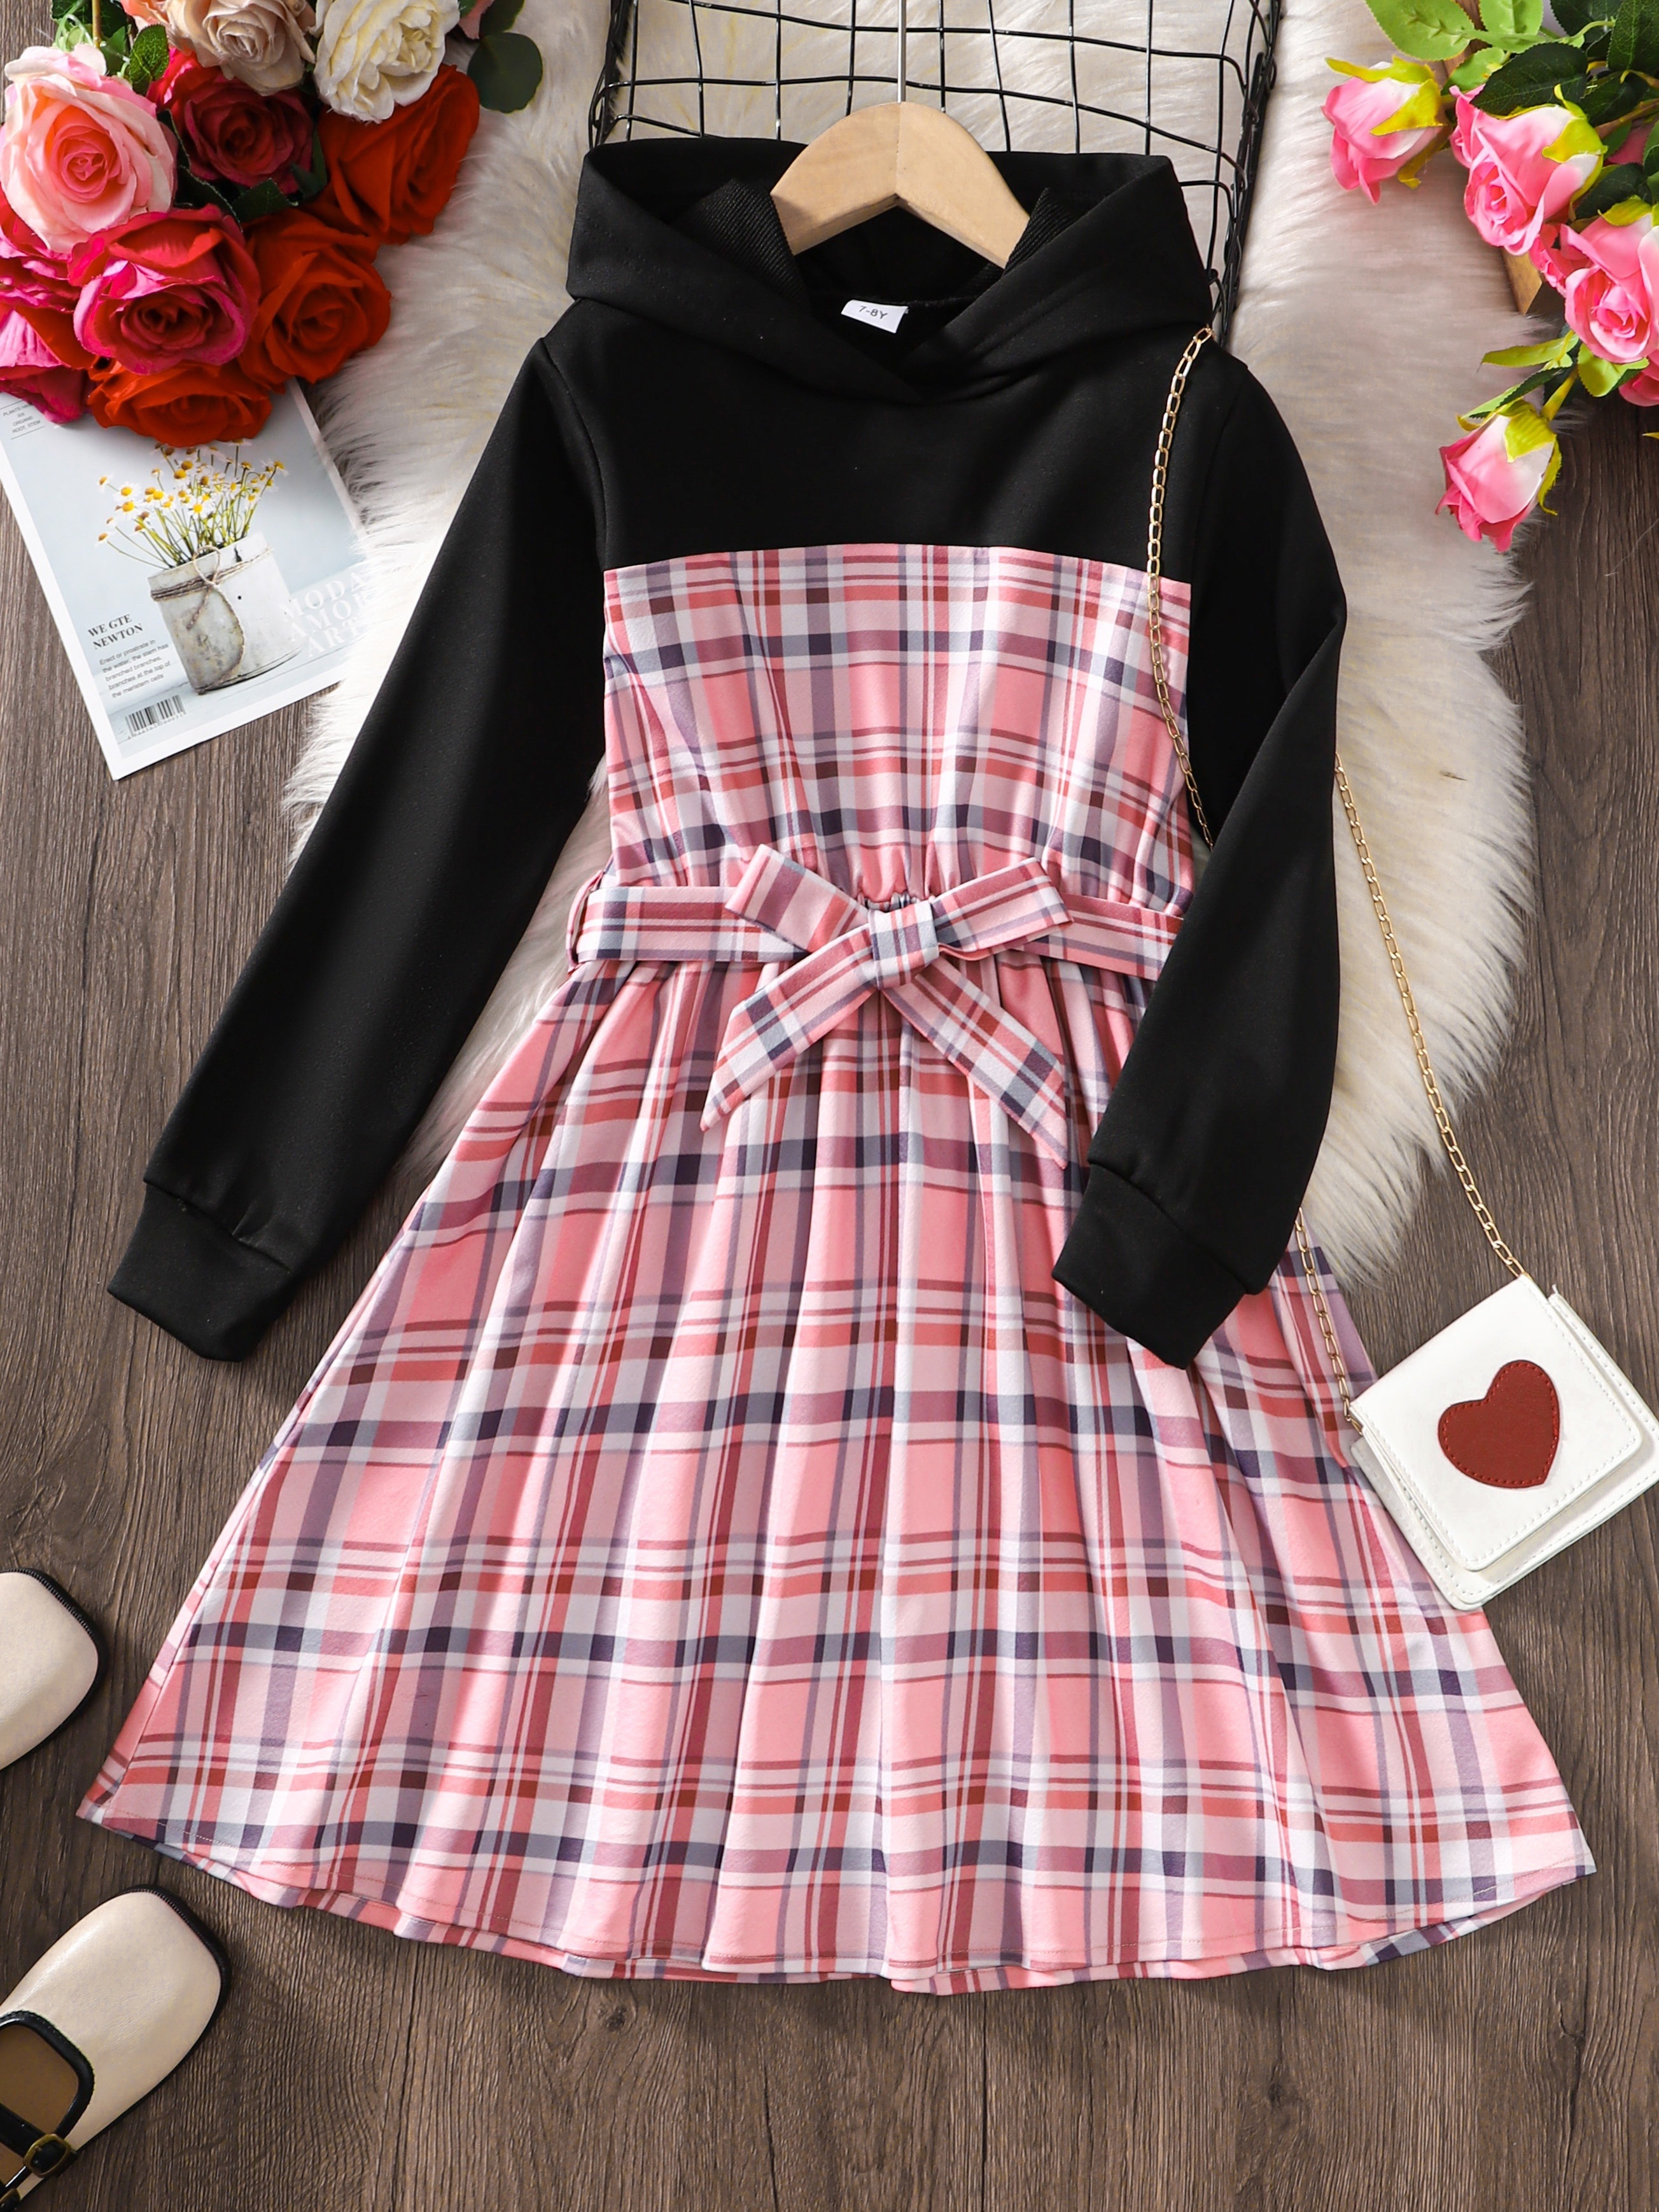 Hooded Plaid Dress With Bowknot Belt Cute Long Sleeve Dresses For Spring  And Autumn, Everyday, Party